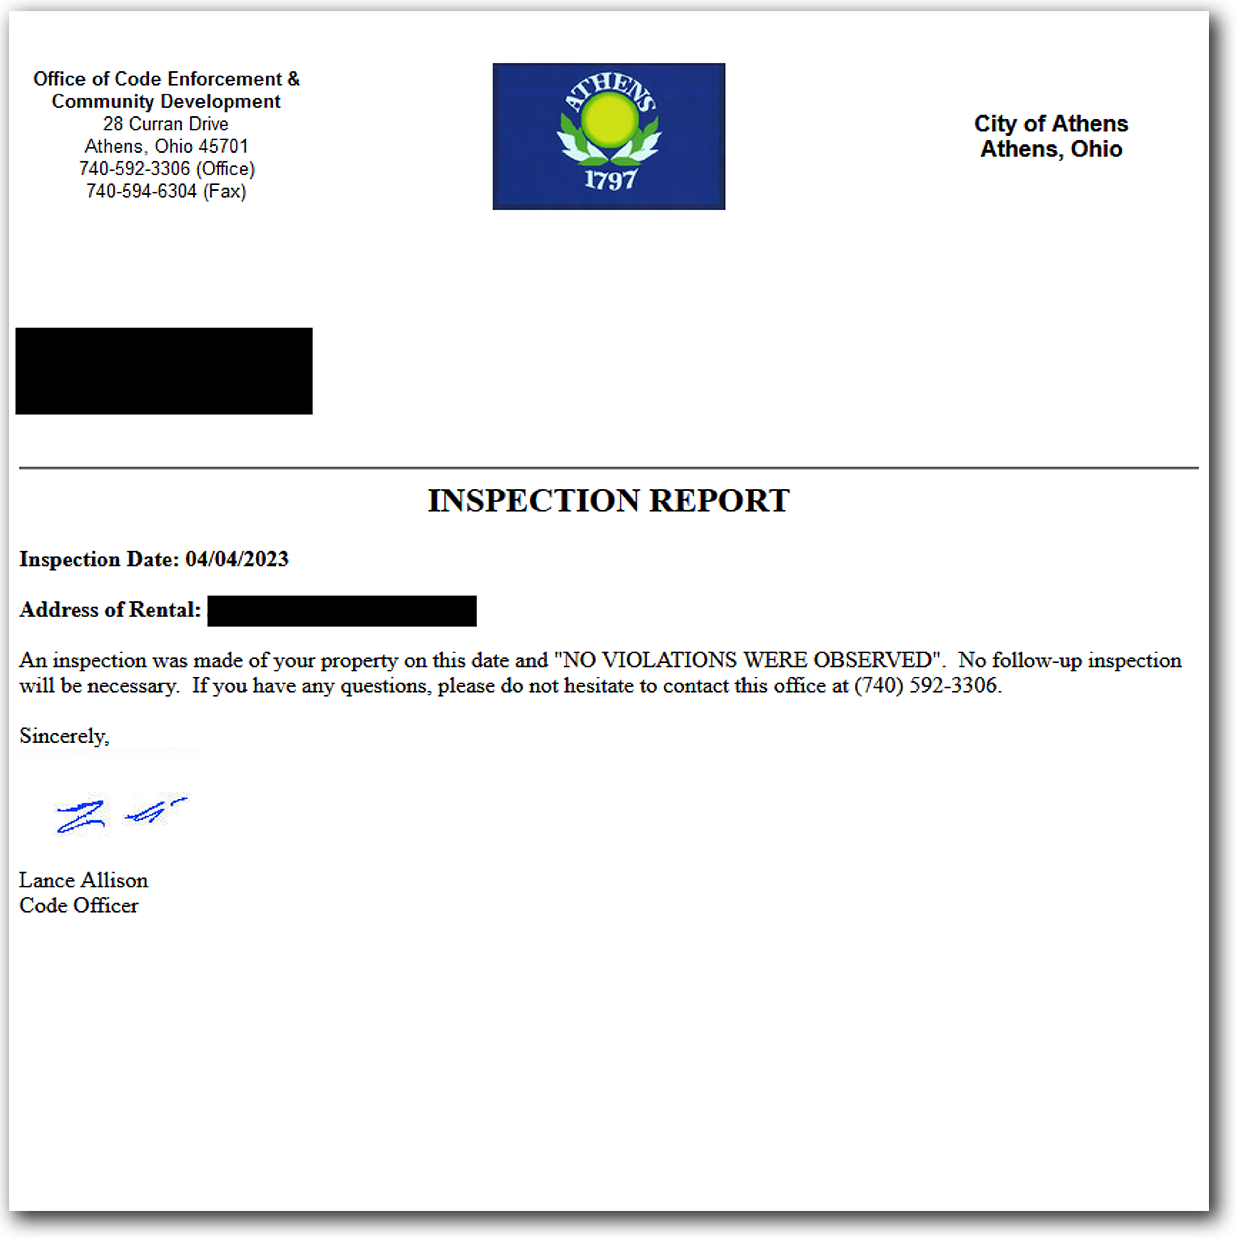 An inspection report by the Athens code enforcement office